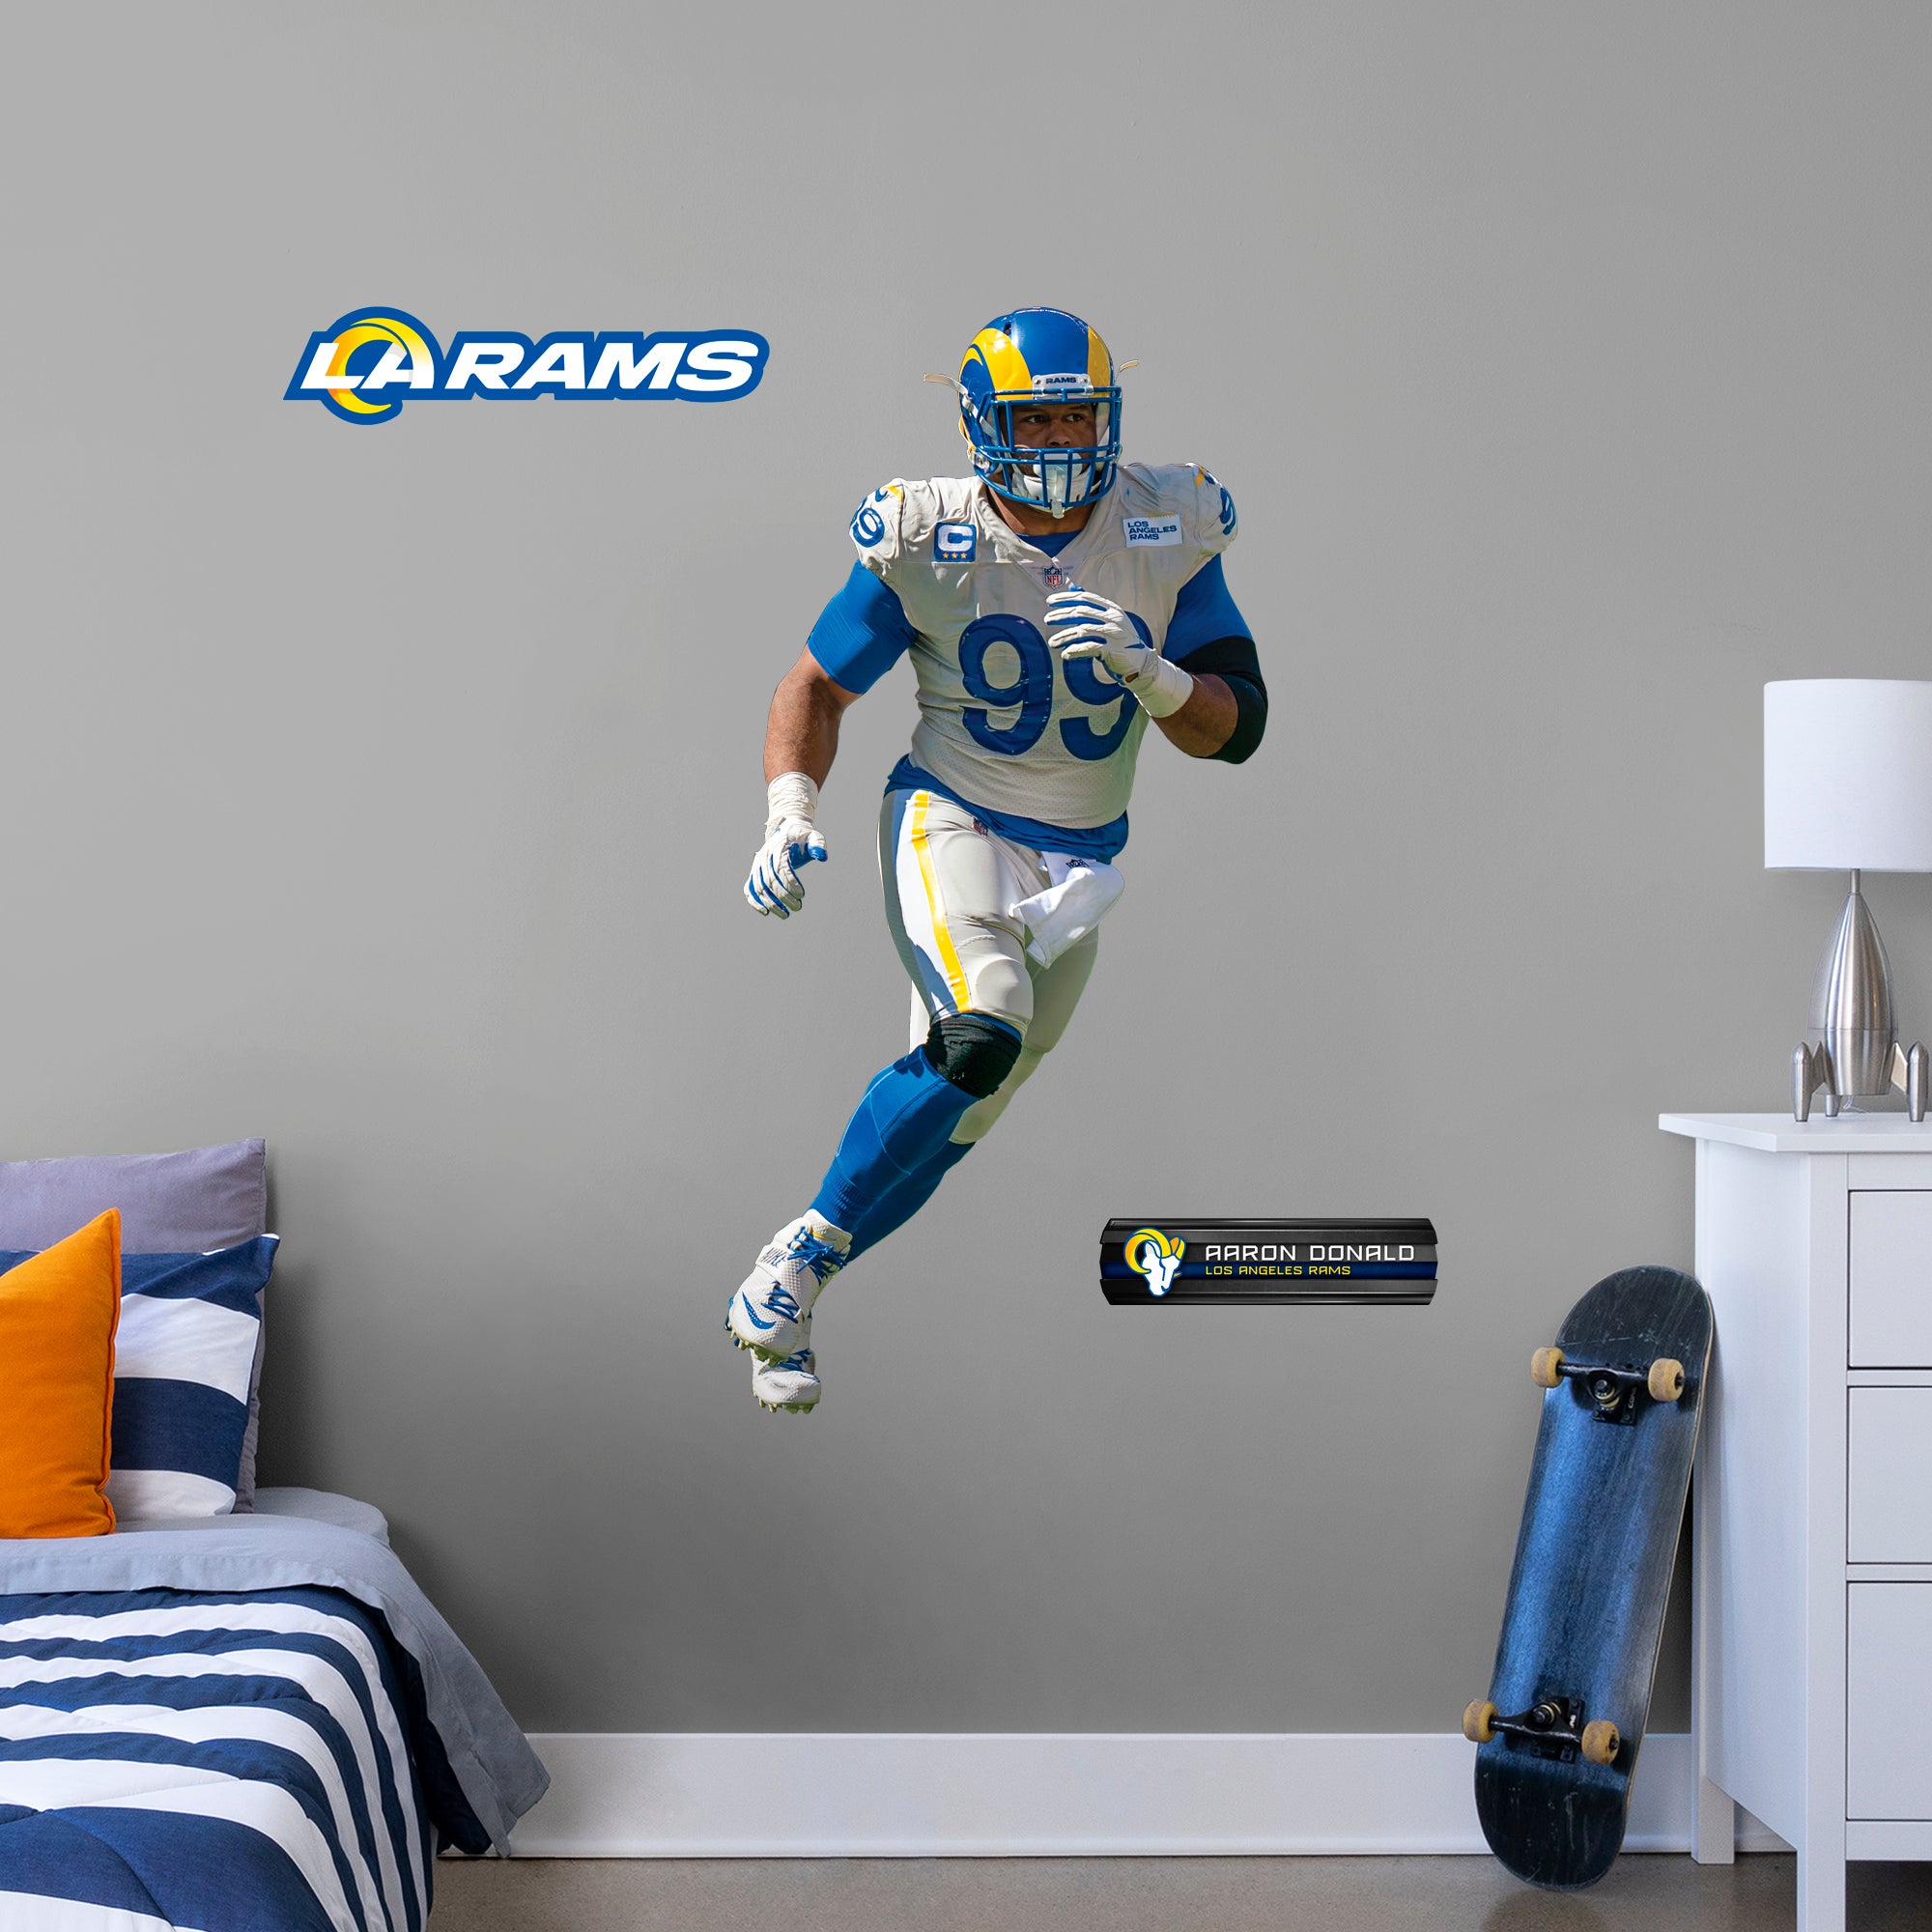 Aaron Donald: RealBig Officially Licensed NFL Removable Wall Decal Giant Athlete + 2 Decals by Fathead | Vinyl